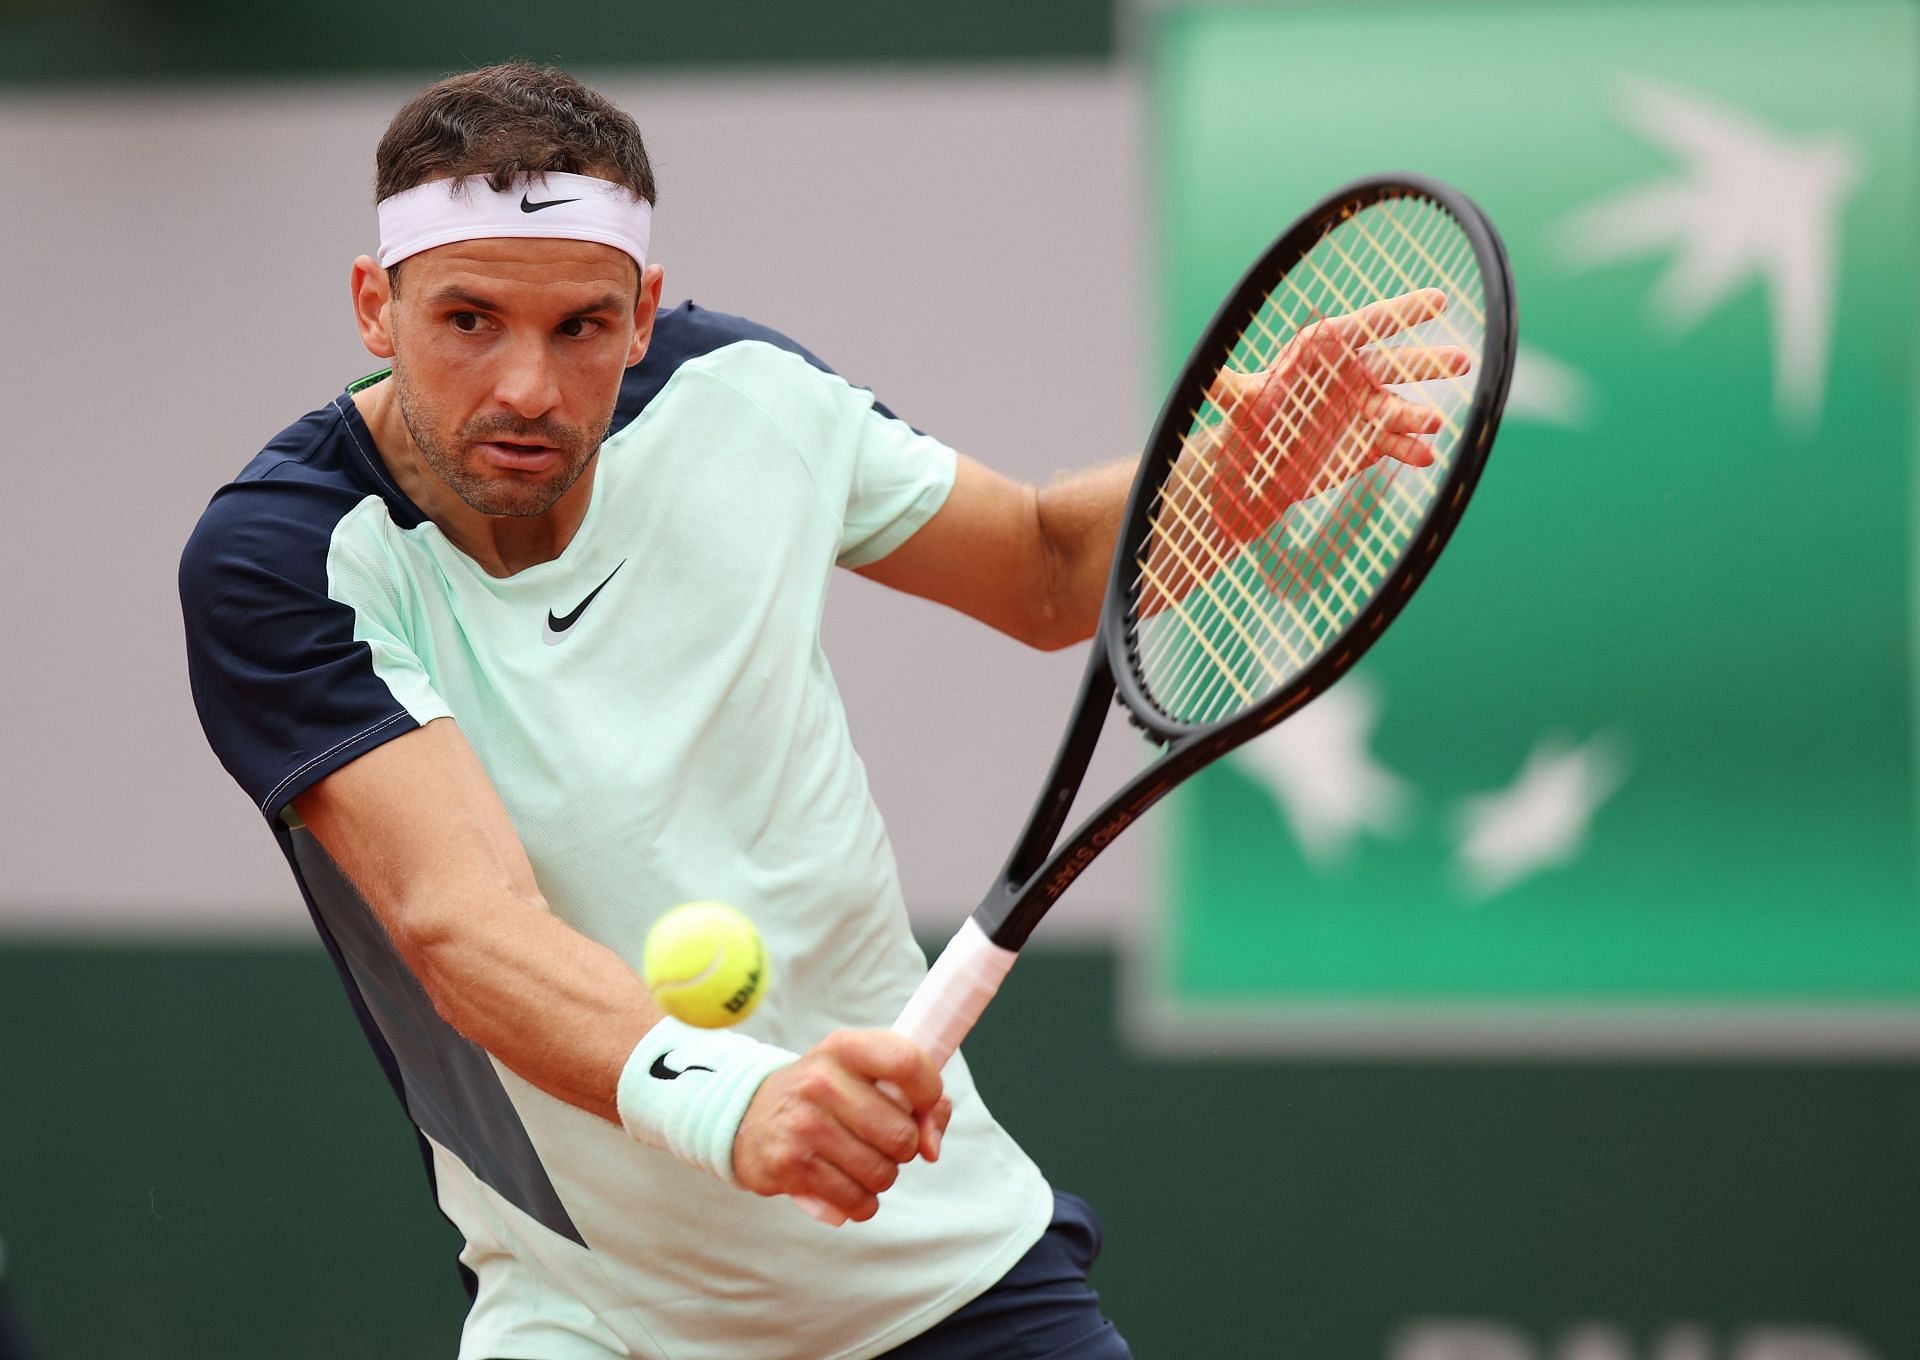 Dimitrov beat Giron in his opening match at the French Open